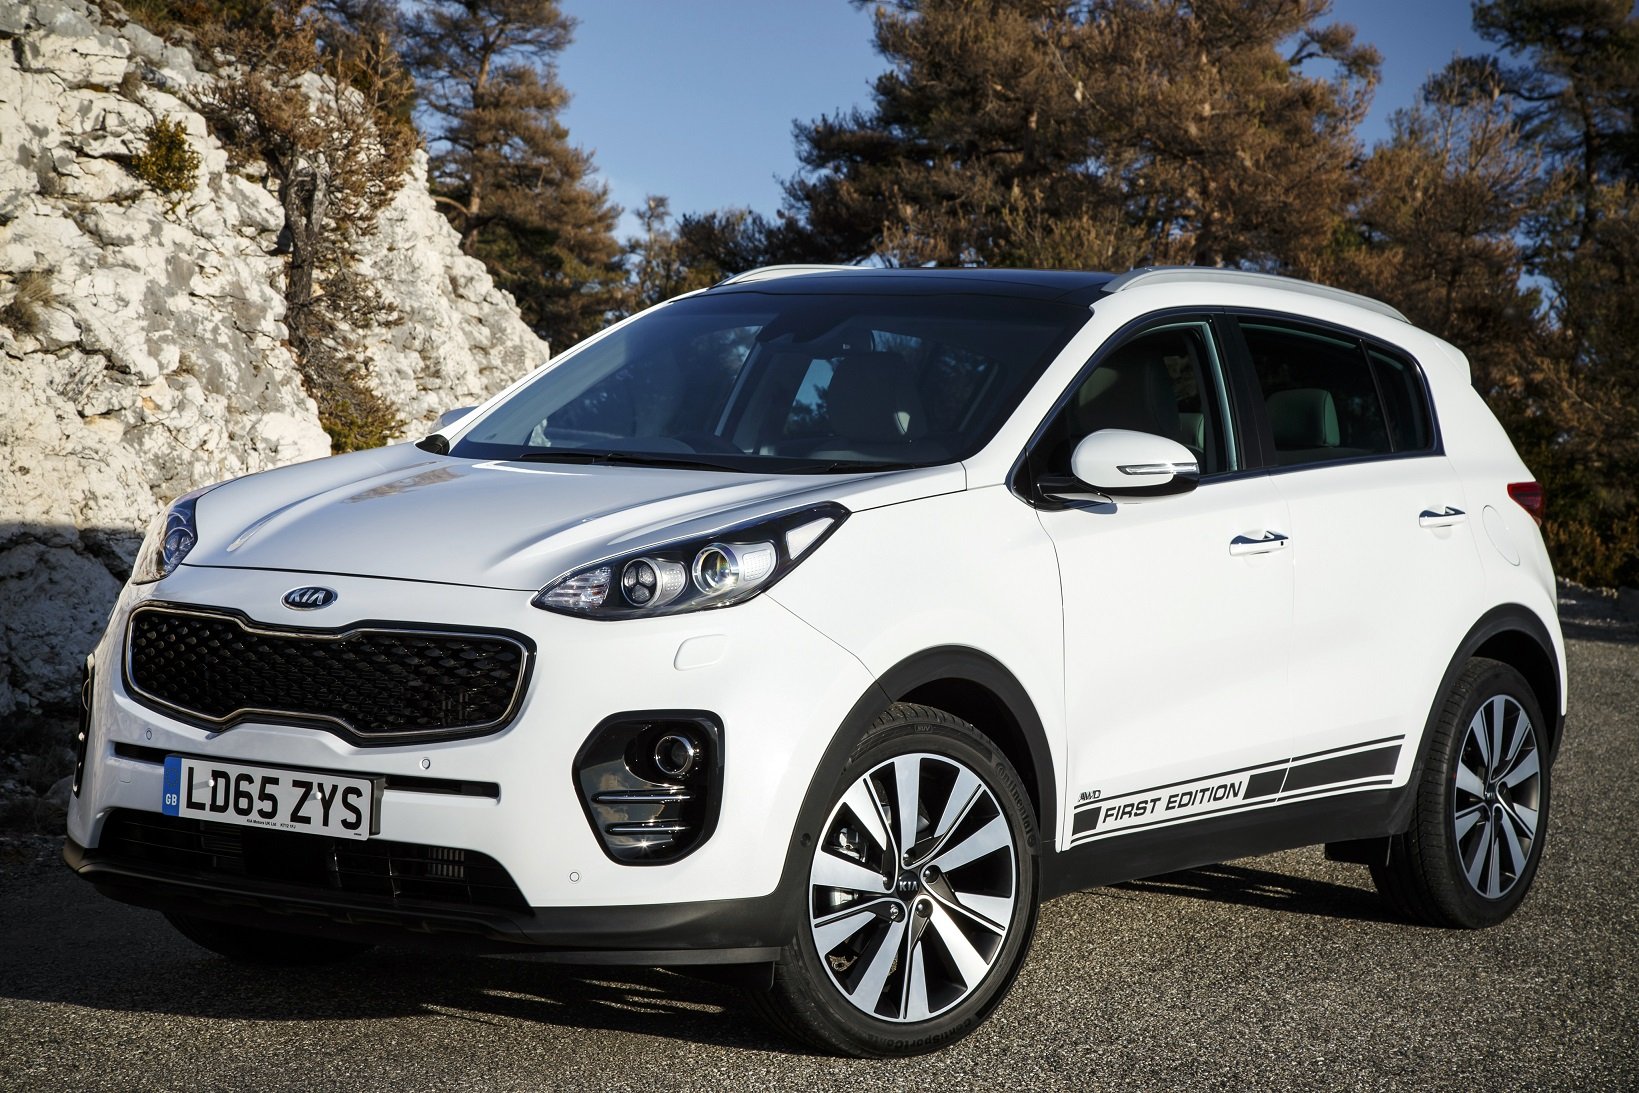 2016, Cars, Kia, Sportage, Suv, First, Edition, White Wallpapers HD